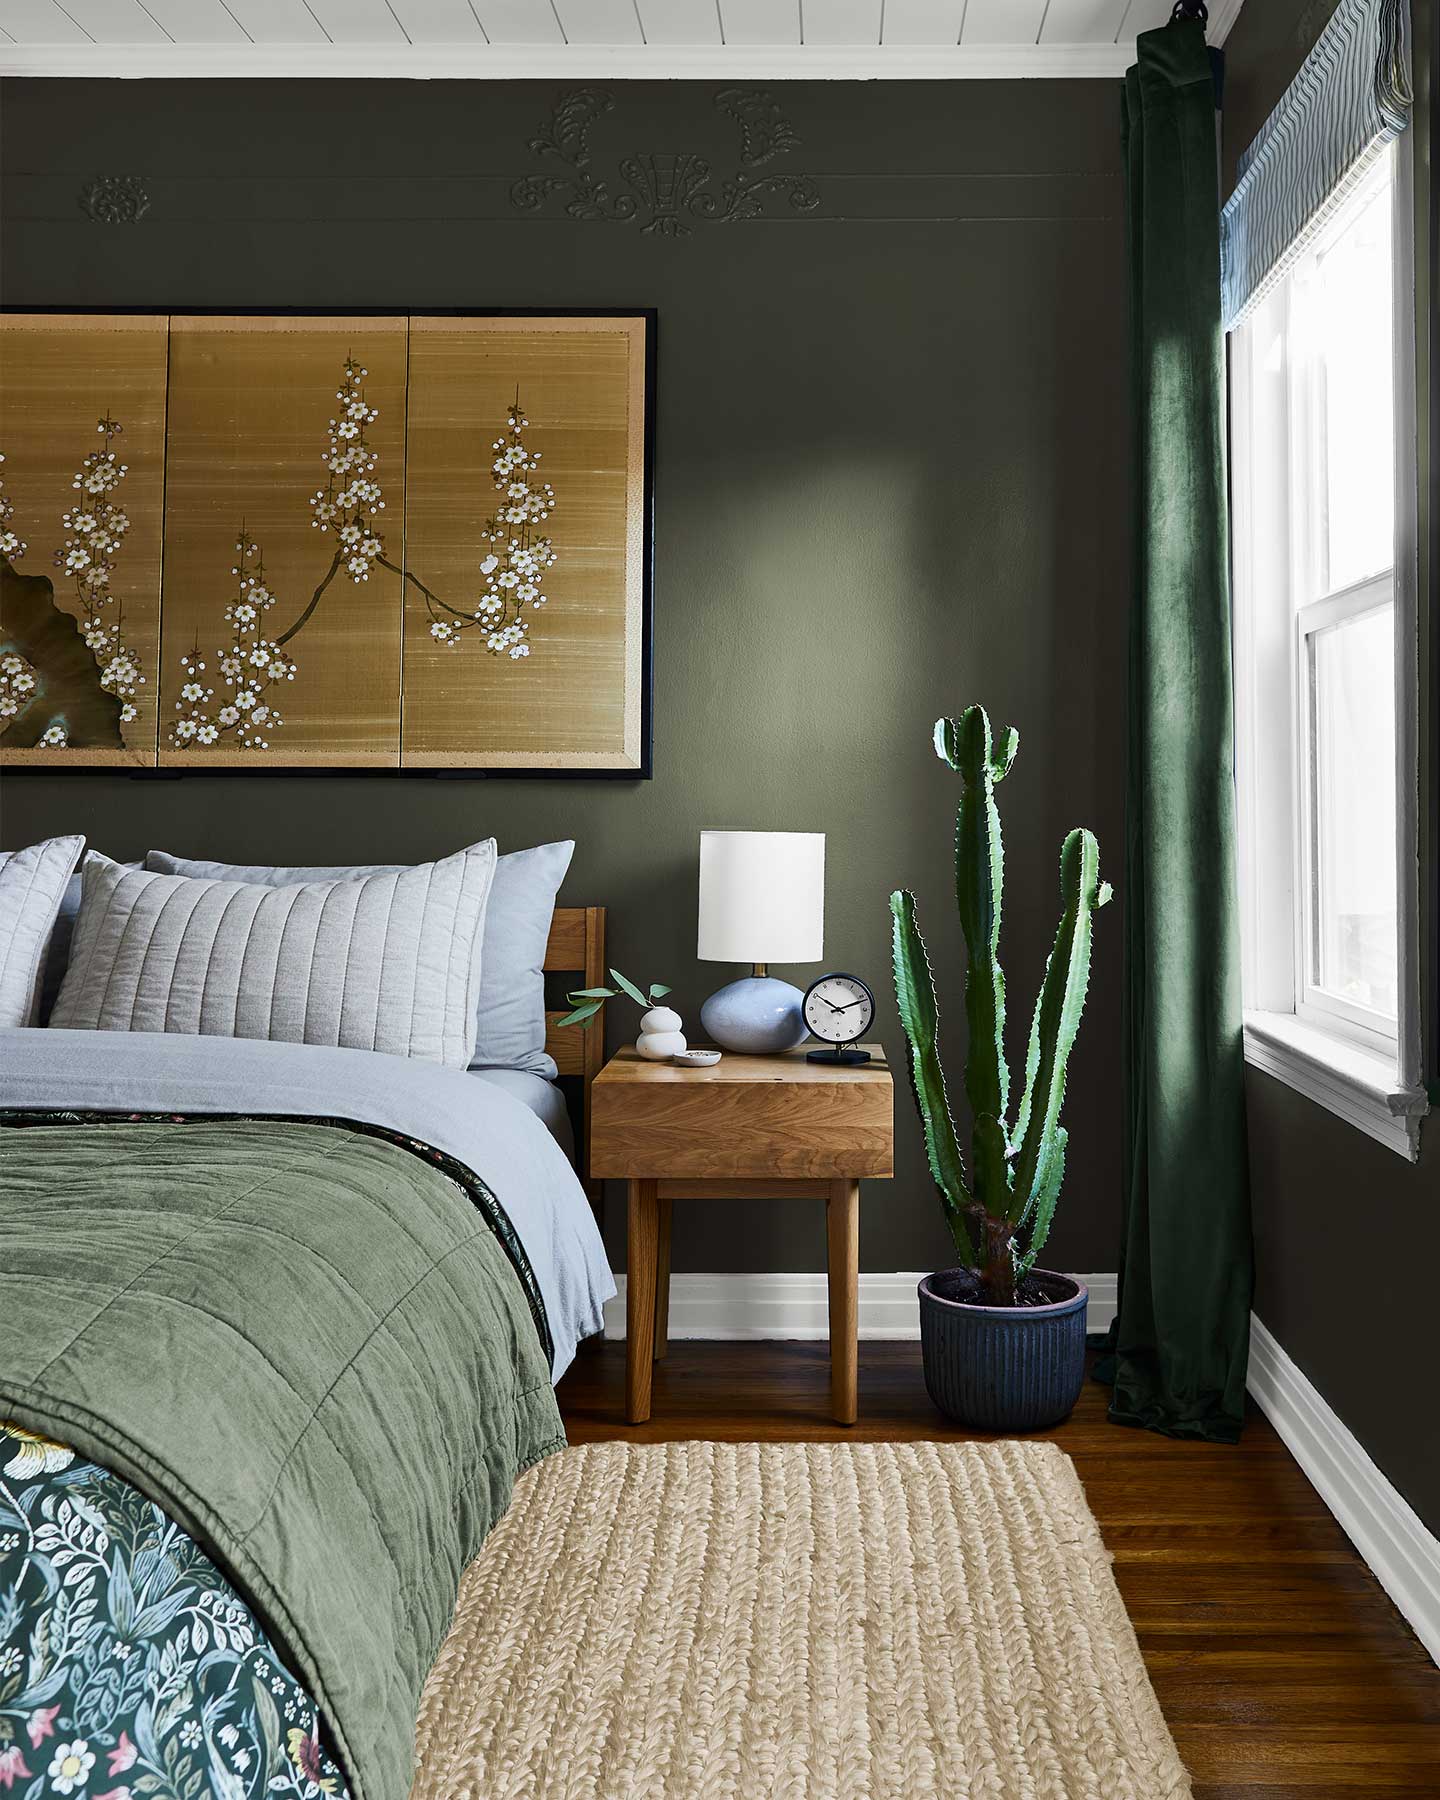 Field Trip, a deep forest green, is one of our favorite bedroom paint colors.